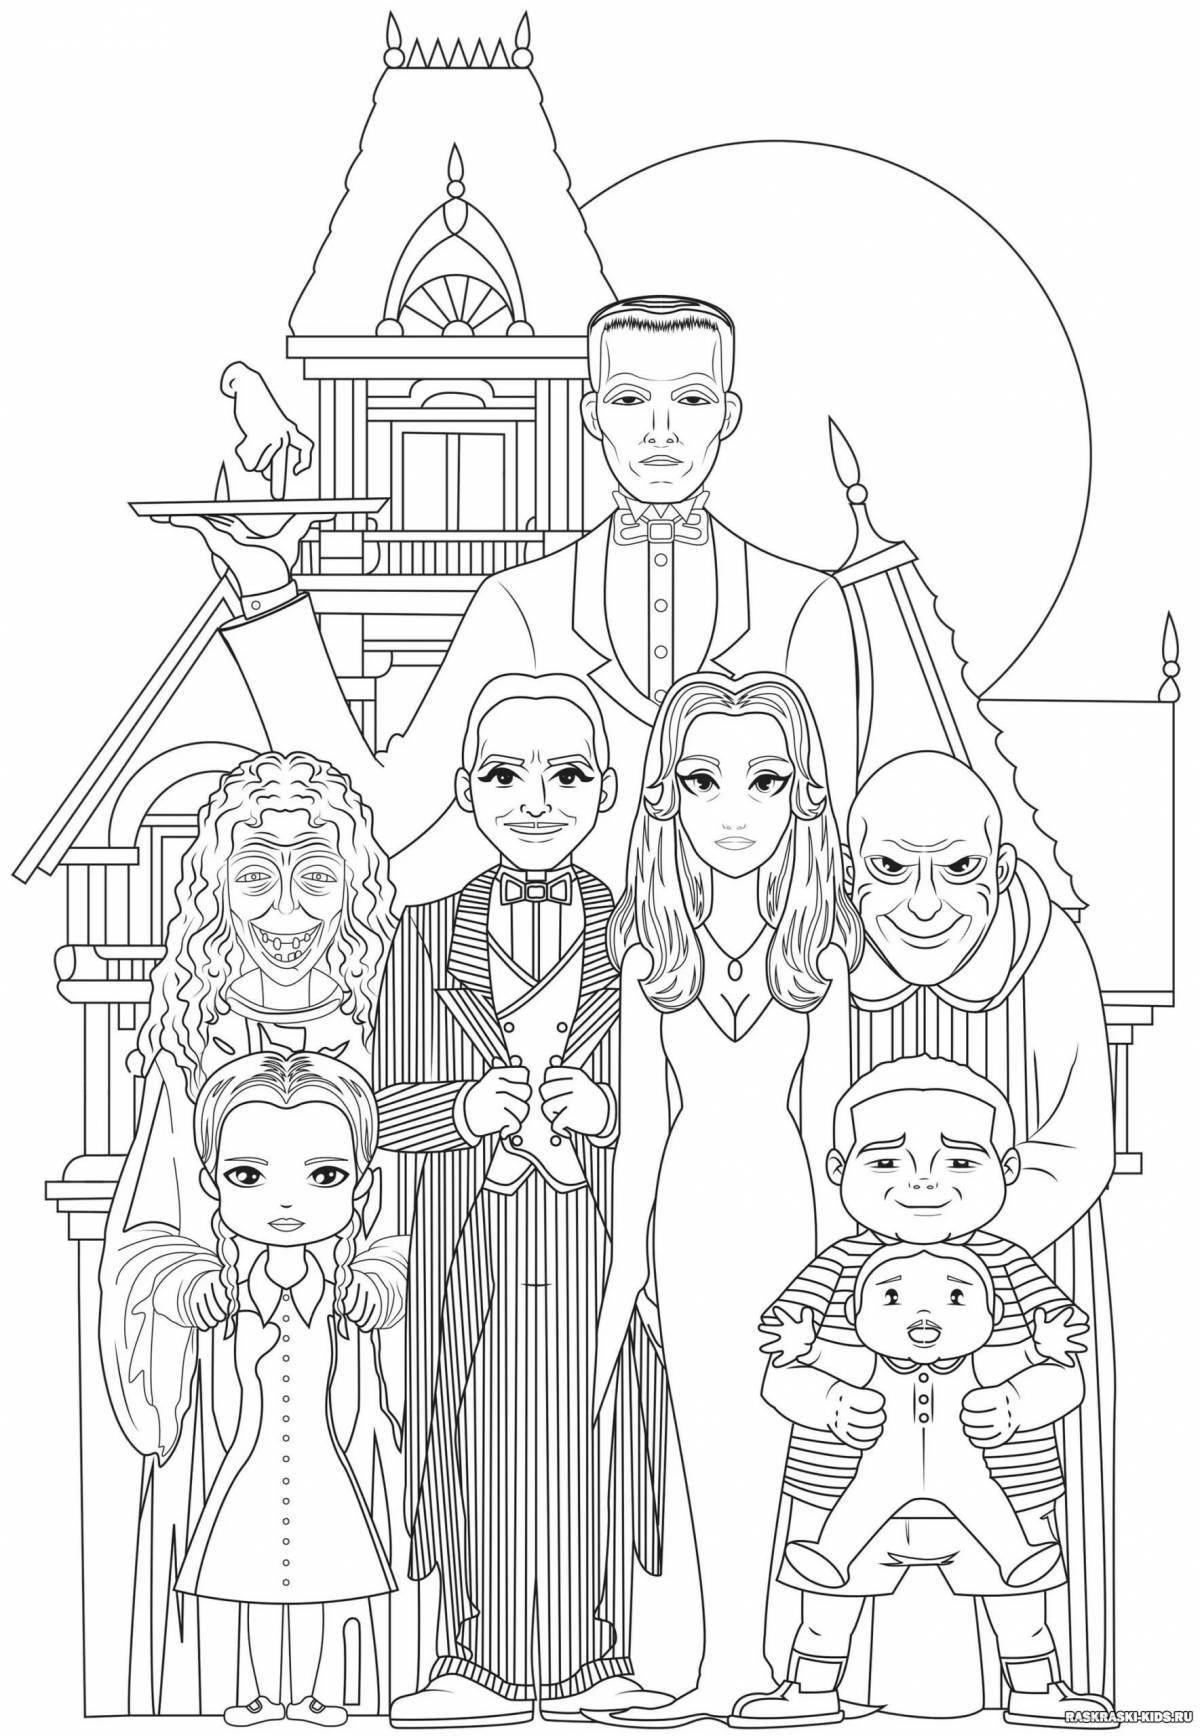 Gorgeous addams family coloring pages for kids